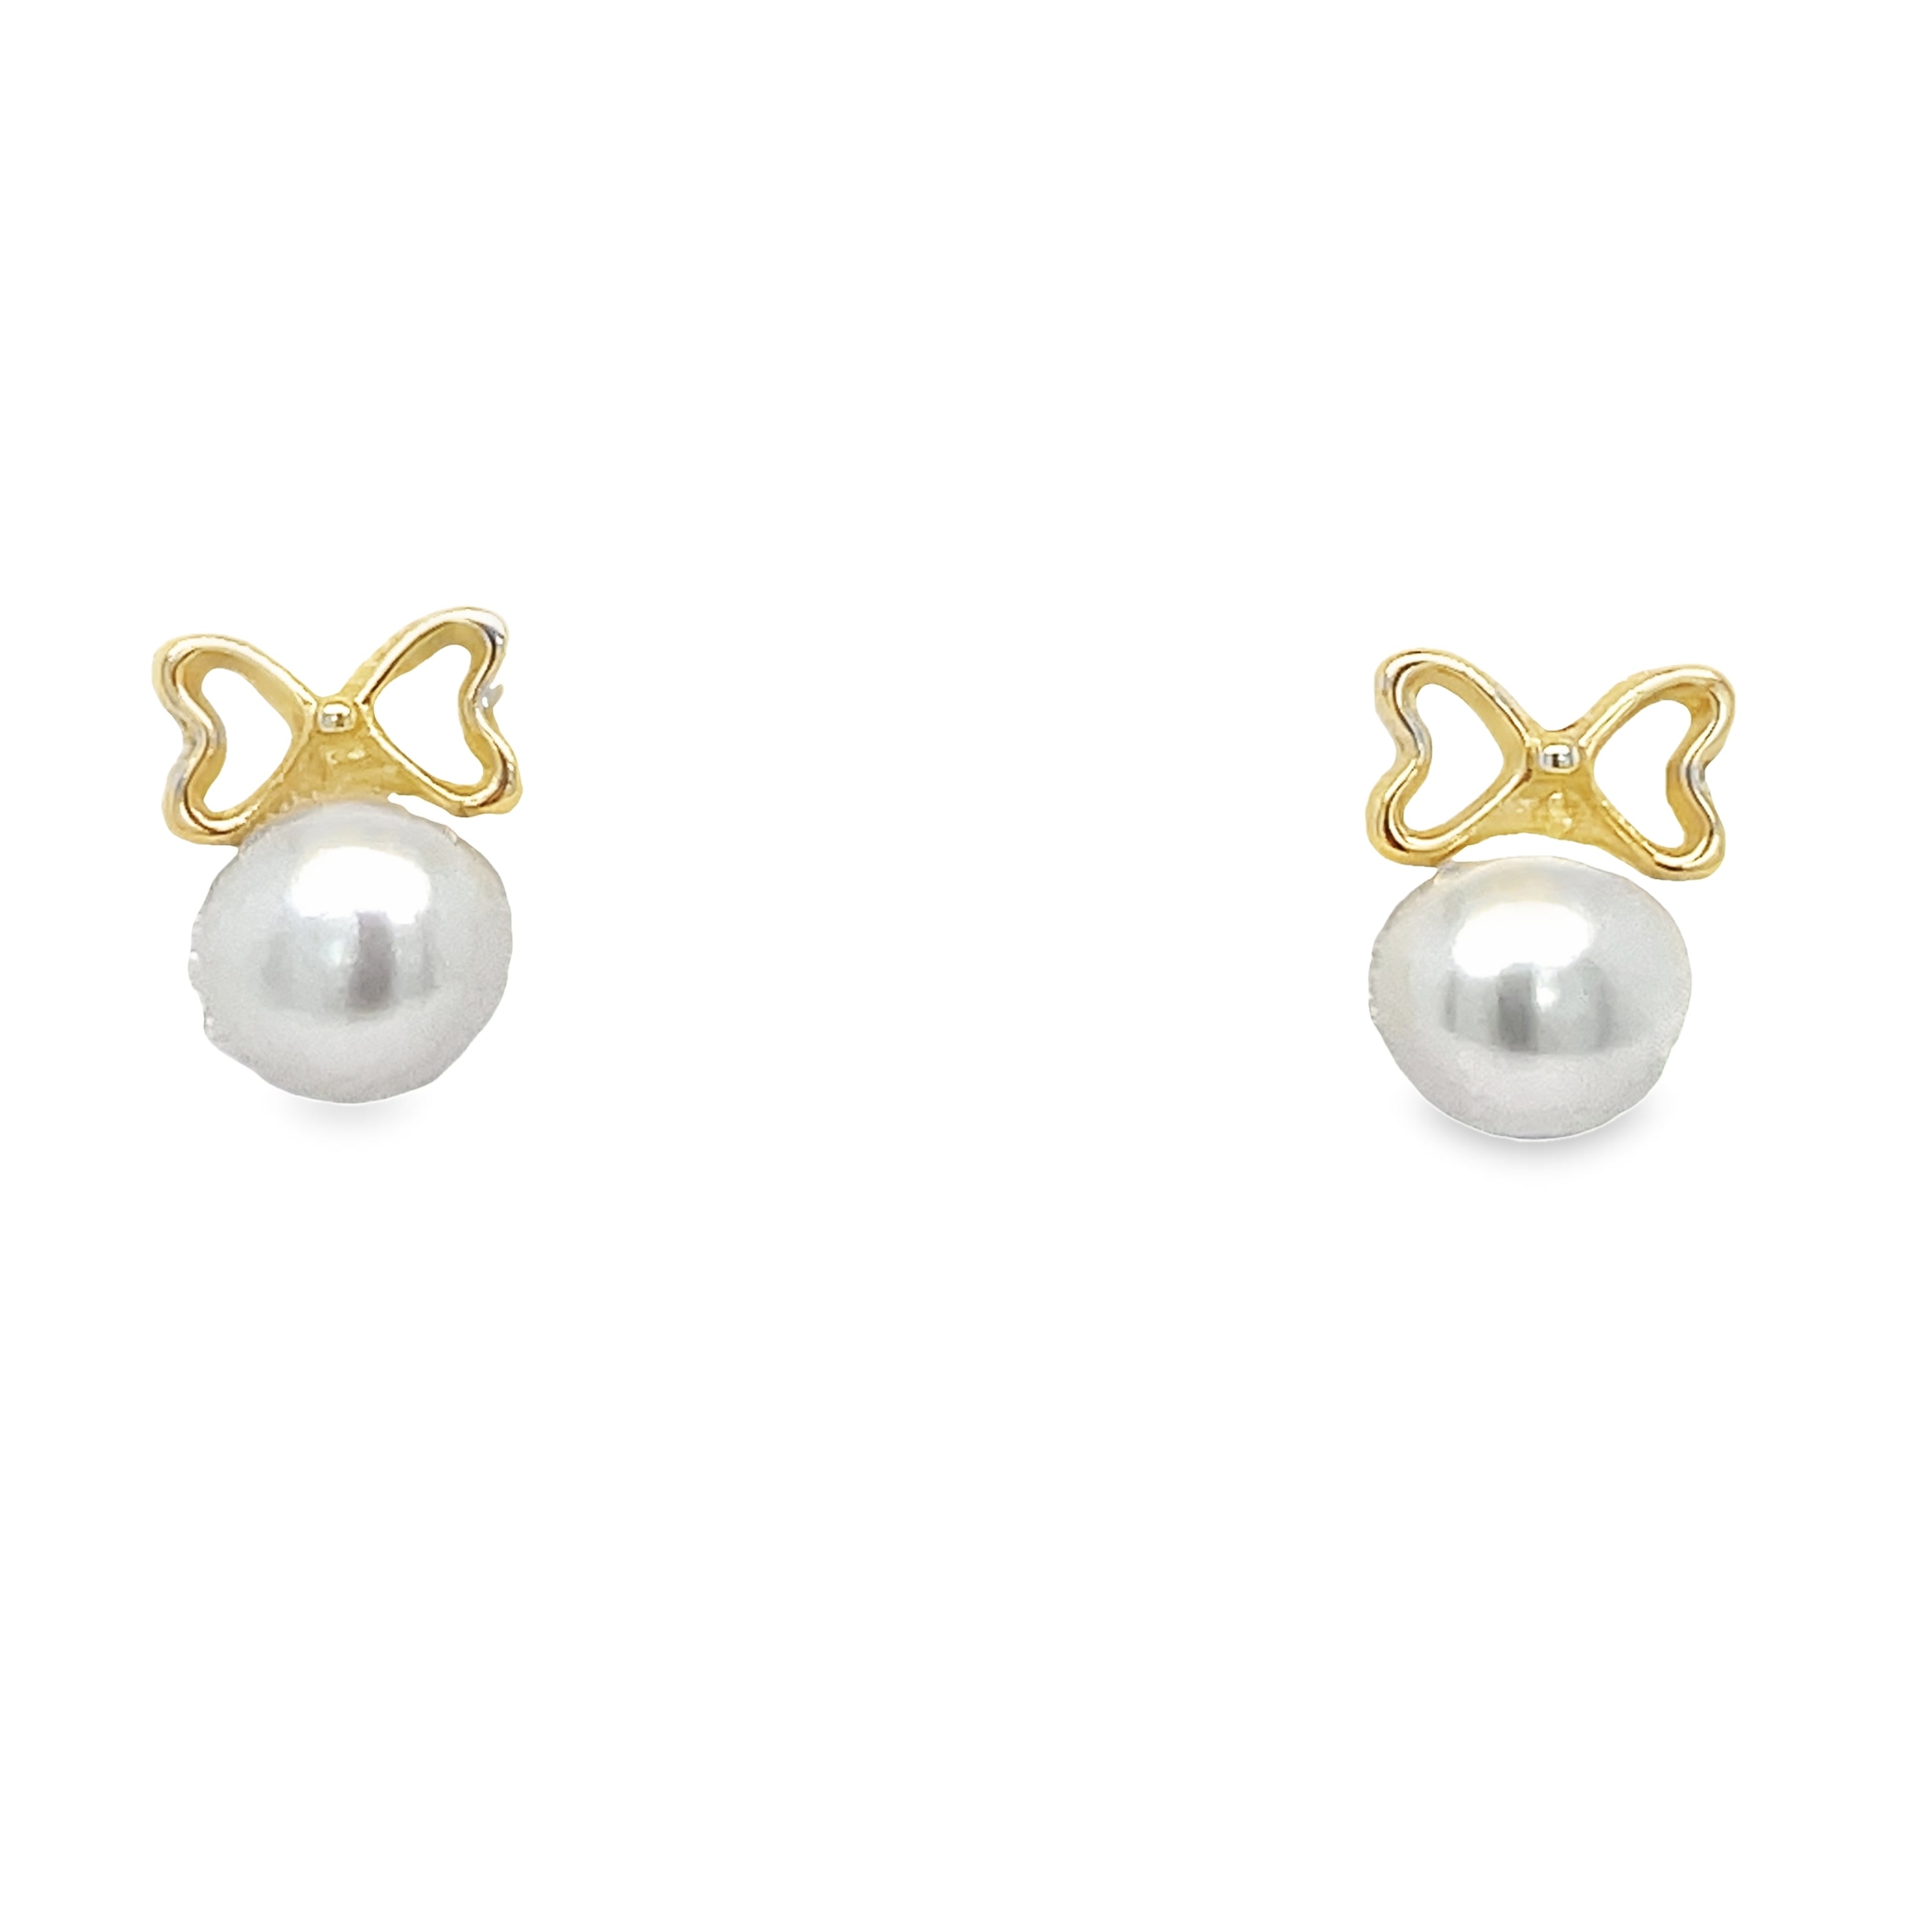 Experience elegance and safety with our 14K Gold Pearl Bow Baby Earrings. Made with 14k yellow gold, these adorable bow-shaped earrings feature a small pearl that adds a touch of sophistication. The secure baby backs ensure that your little one can wear them comfortably without worry.